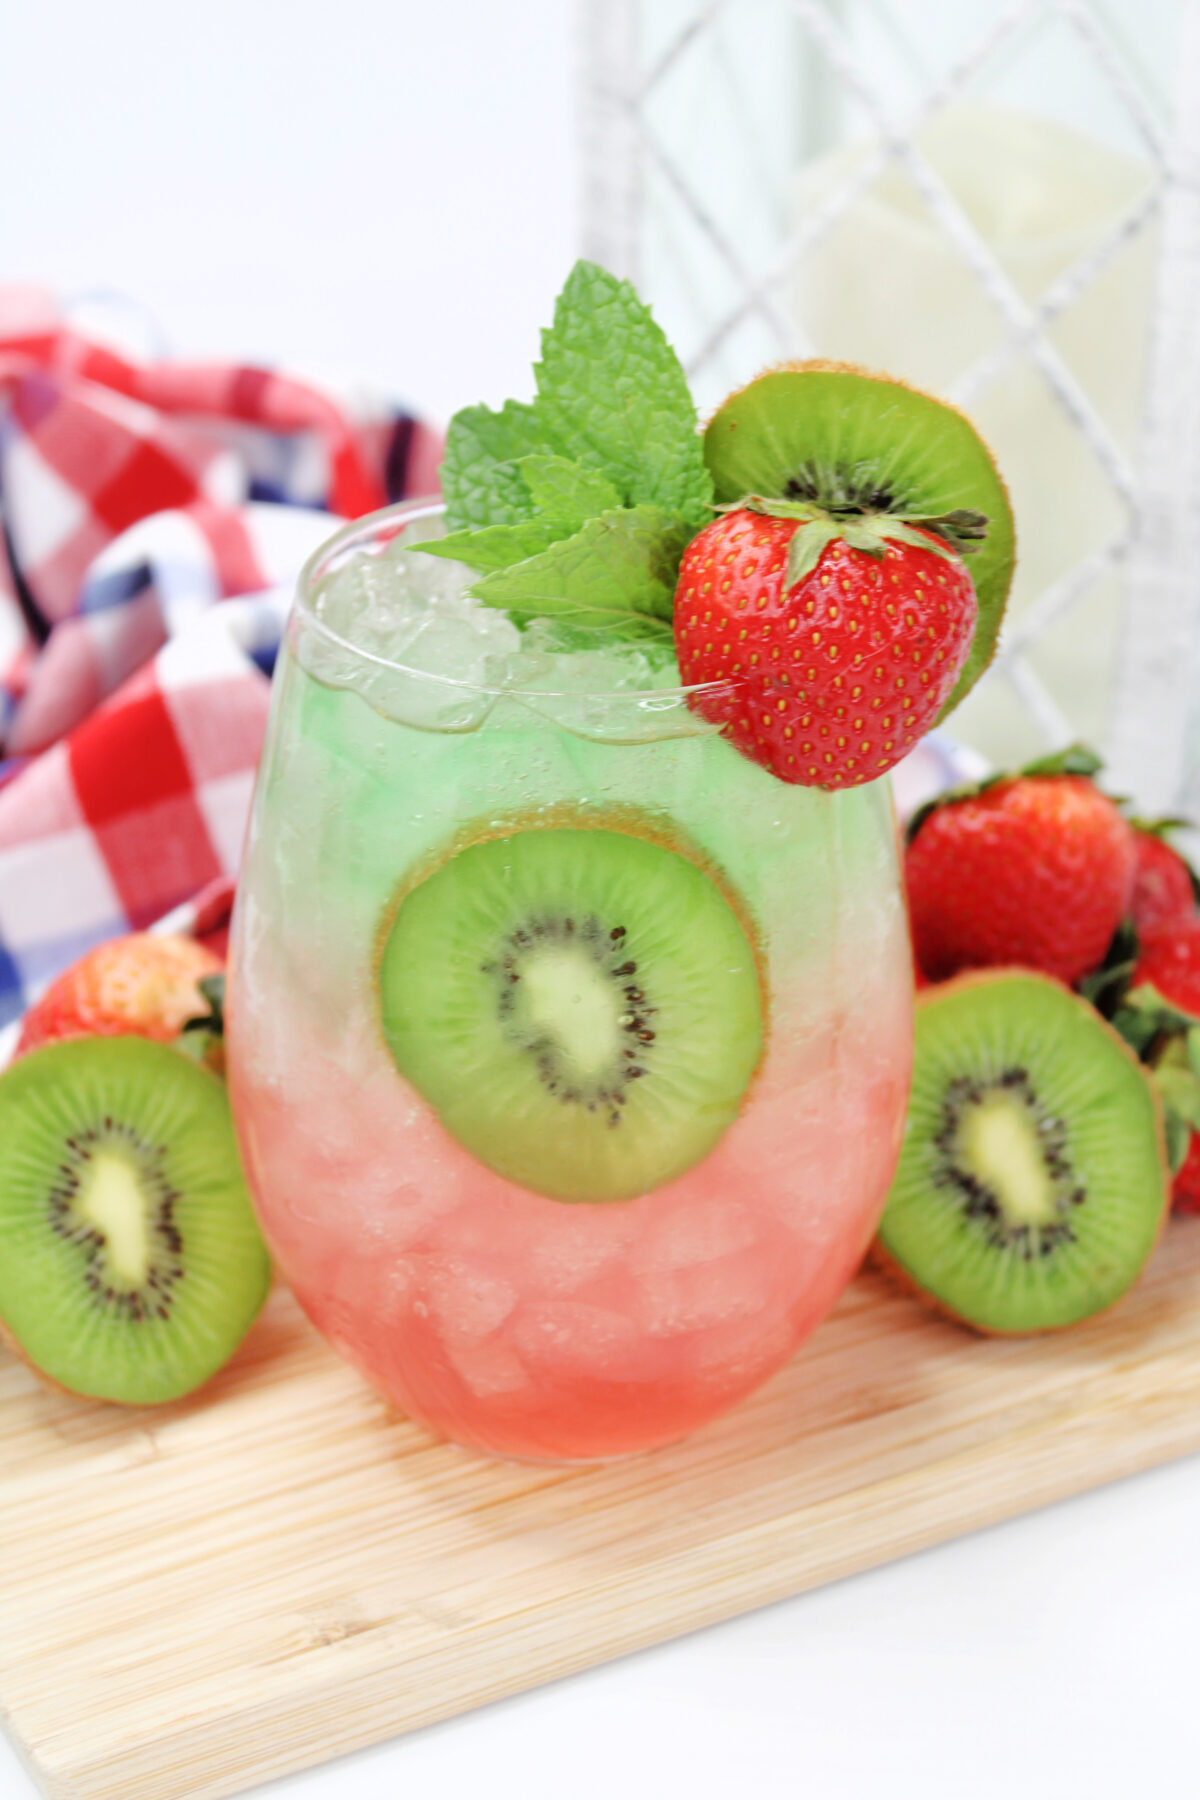 Looking for a refreshing drink to cool down with this summer? Check out this strawberry kiwi cocktail recipe, it's perfect for any occasion!